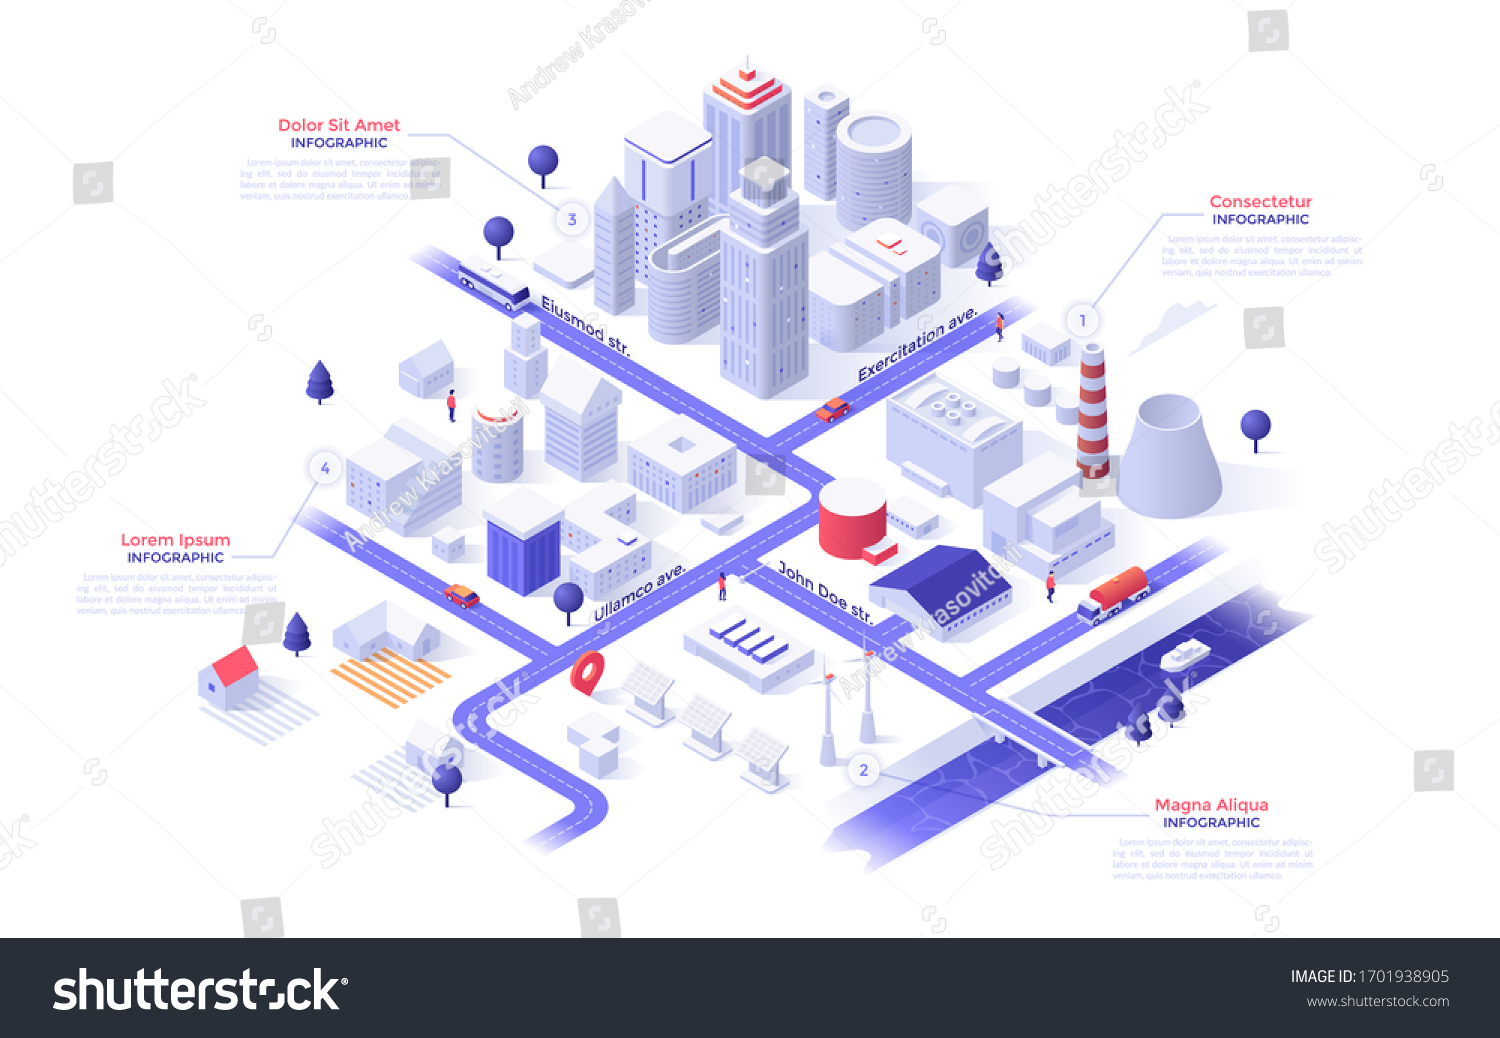 Isometric map of metropolis city with paper white downtown skyscrapers, suburban houses, industrial buildings, power plants, streets, river, bridge. Infographic design template. Vector illustration.